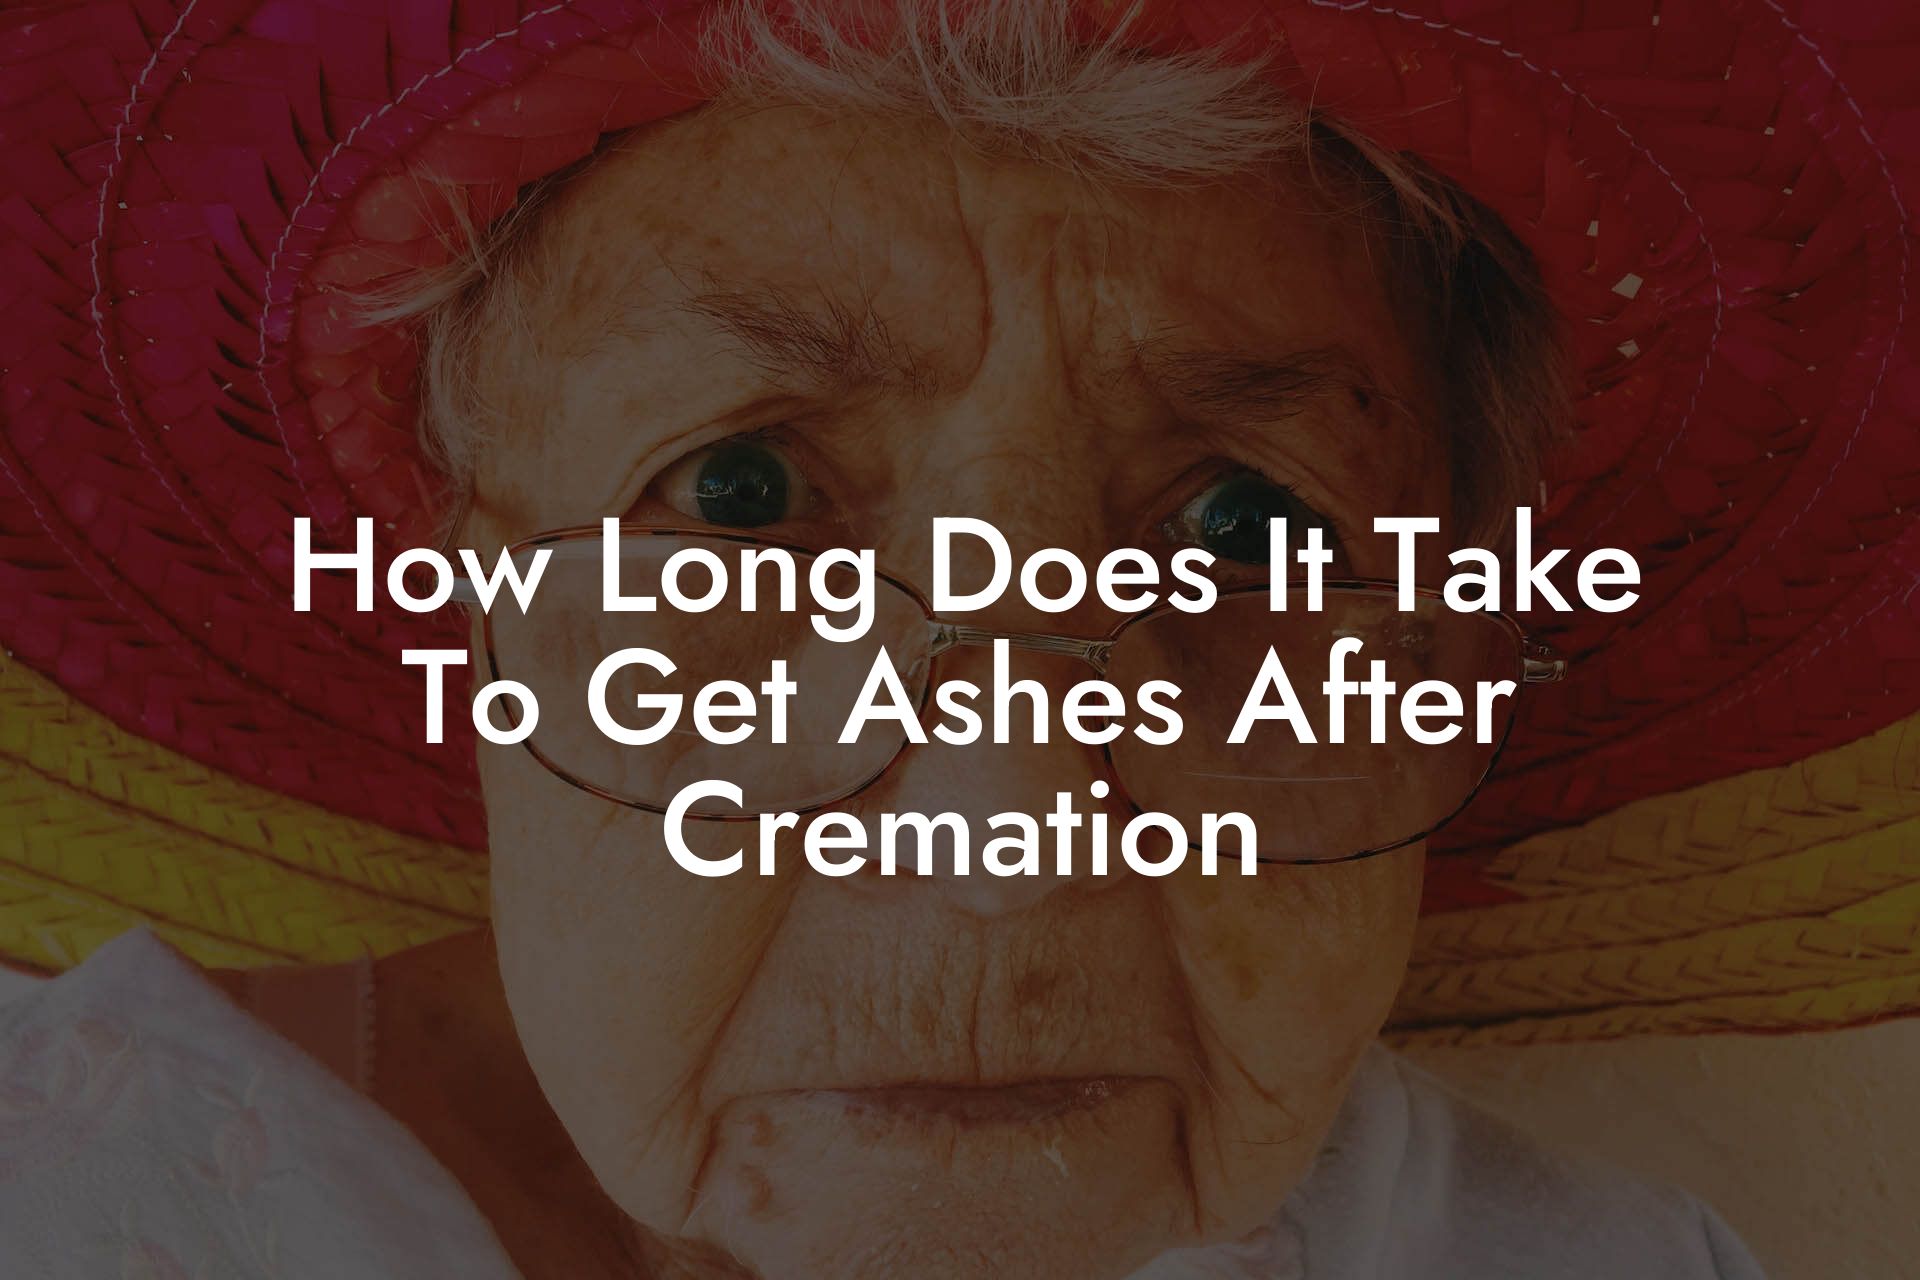 How Long Does It Take To Get Ashes After Cremation